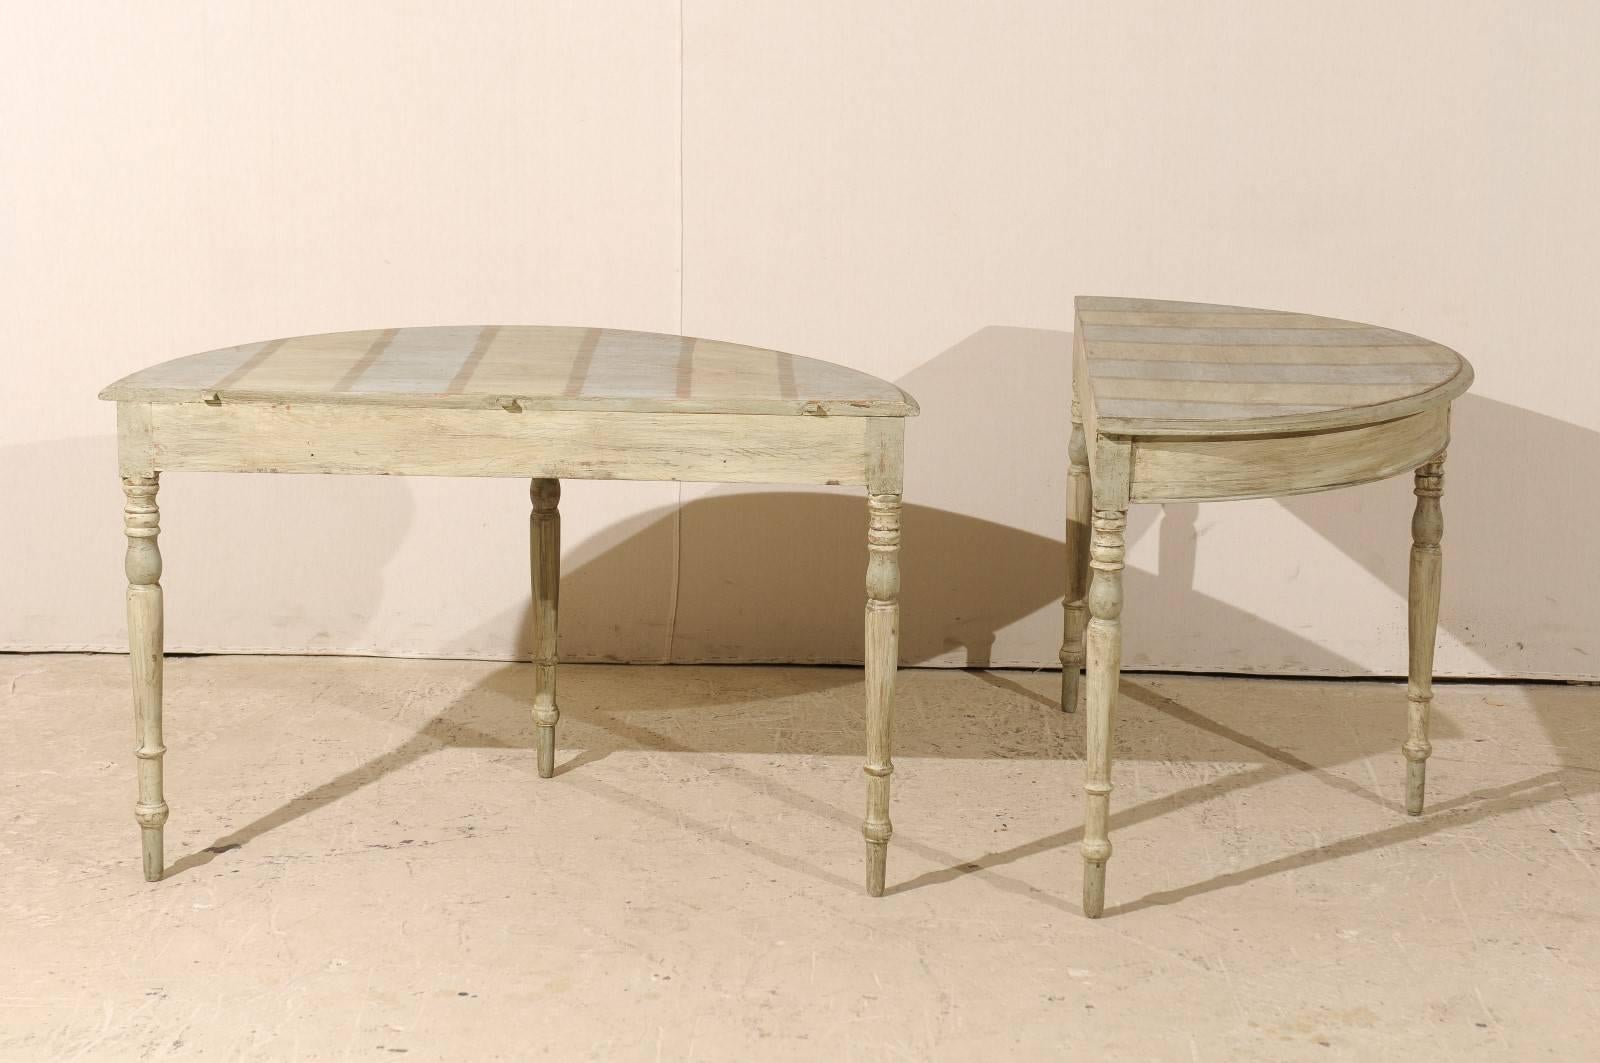 Wood Pair of Swedish Blue or Grey Demilune Console Tables from the 19th Century